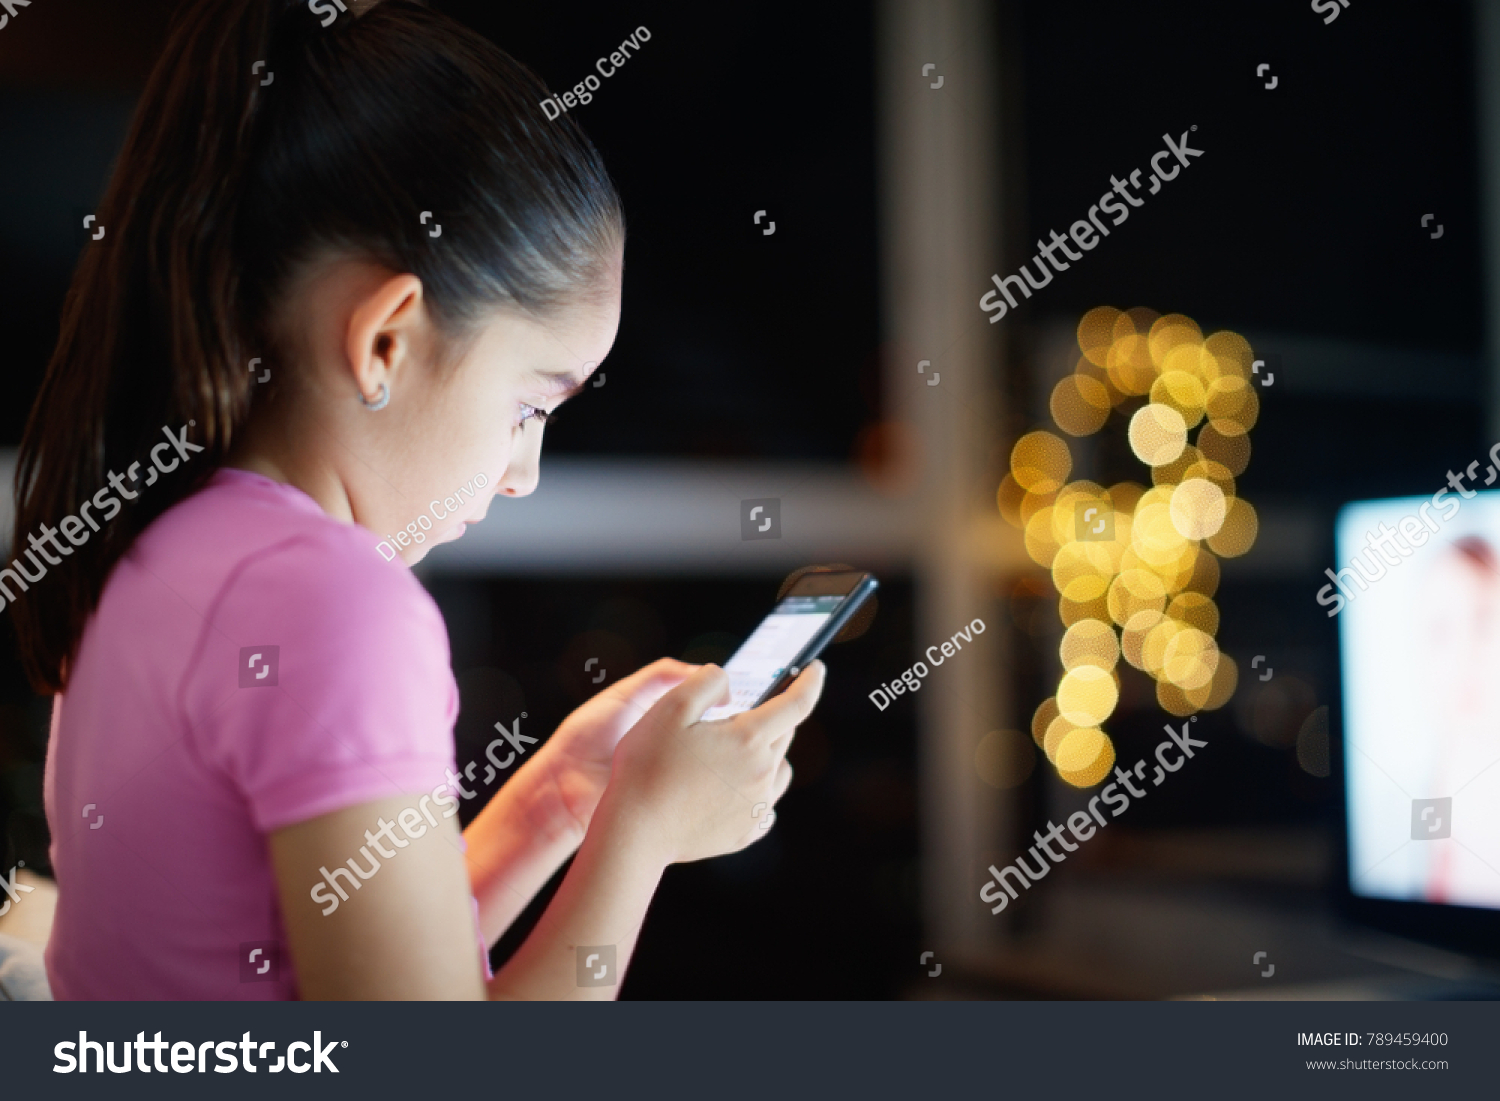 Young people and youth problems. Preteen girl left alone at home, sends text messages with phone to friends. Concept of potential victim of cyber bulling and absence of parental control #789459400